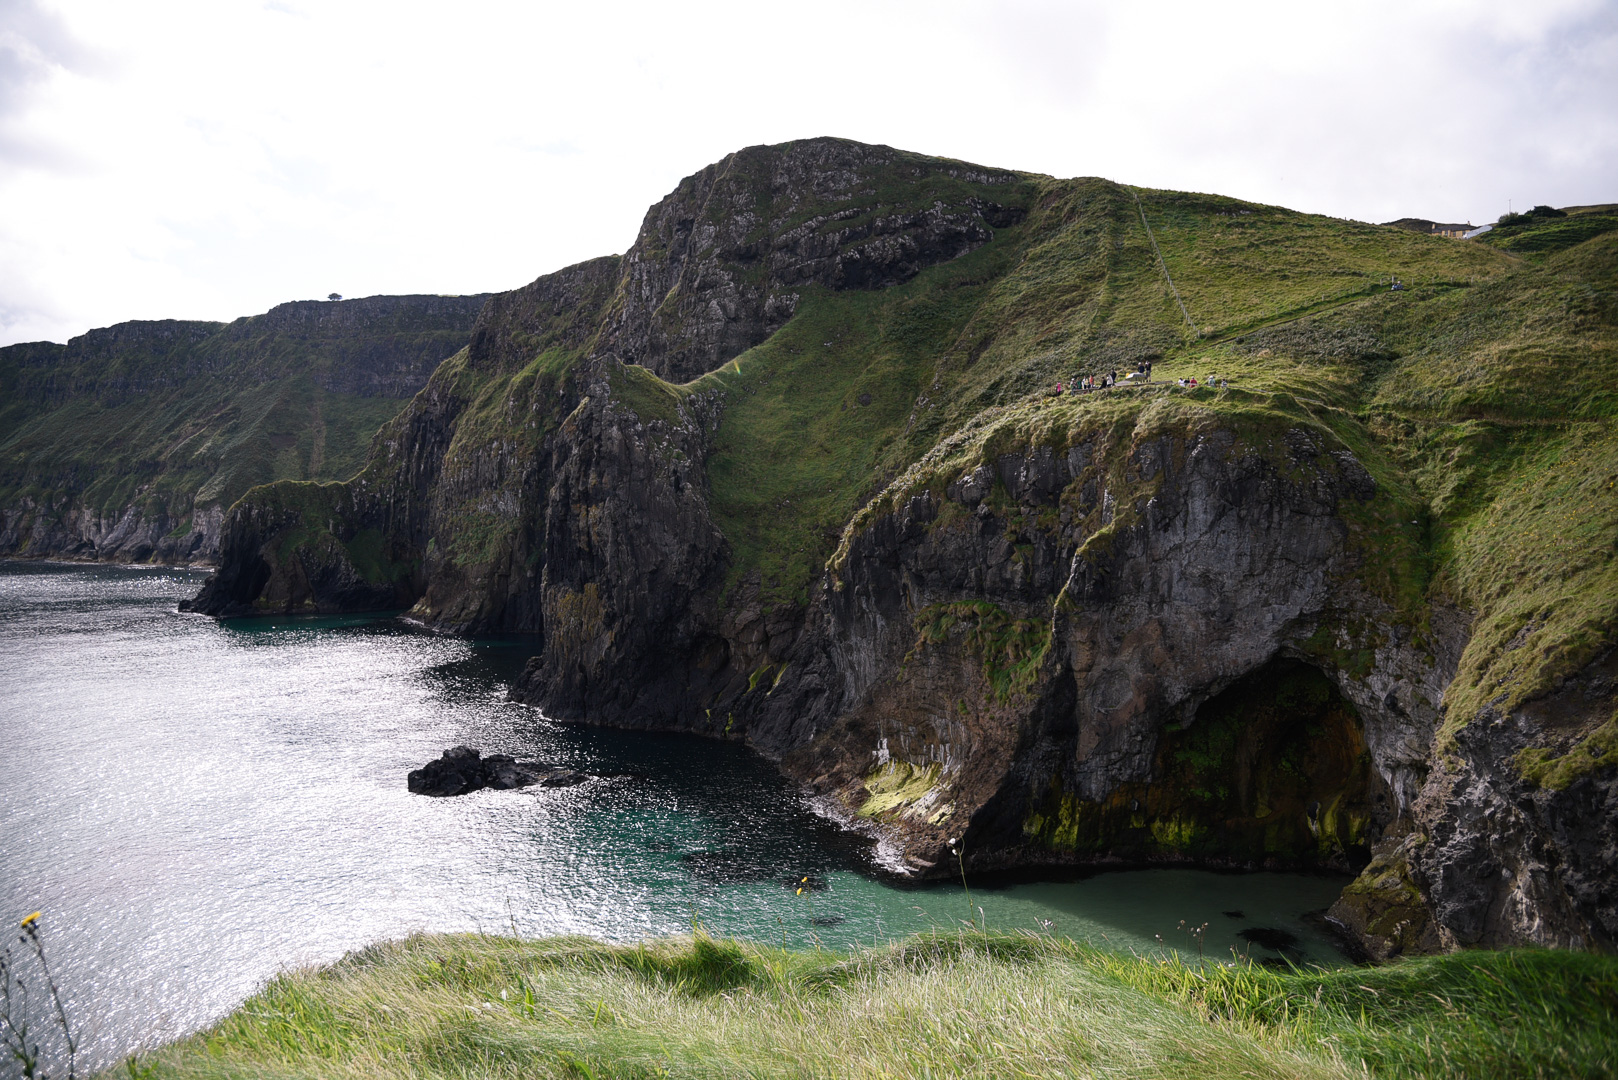 Cliffs in Northern Ireland by Carrick-A-Rede Rope Bridge. 